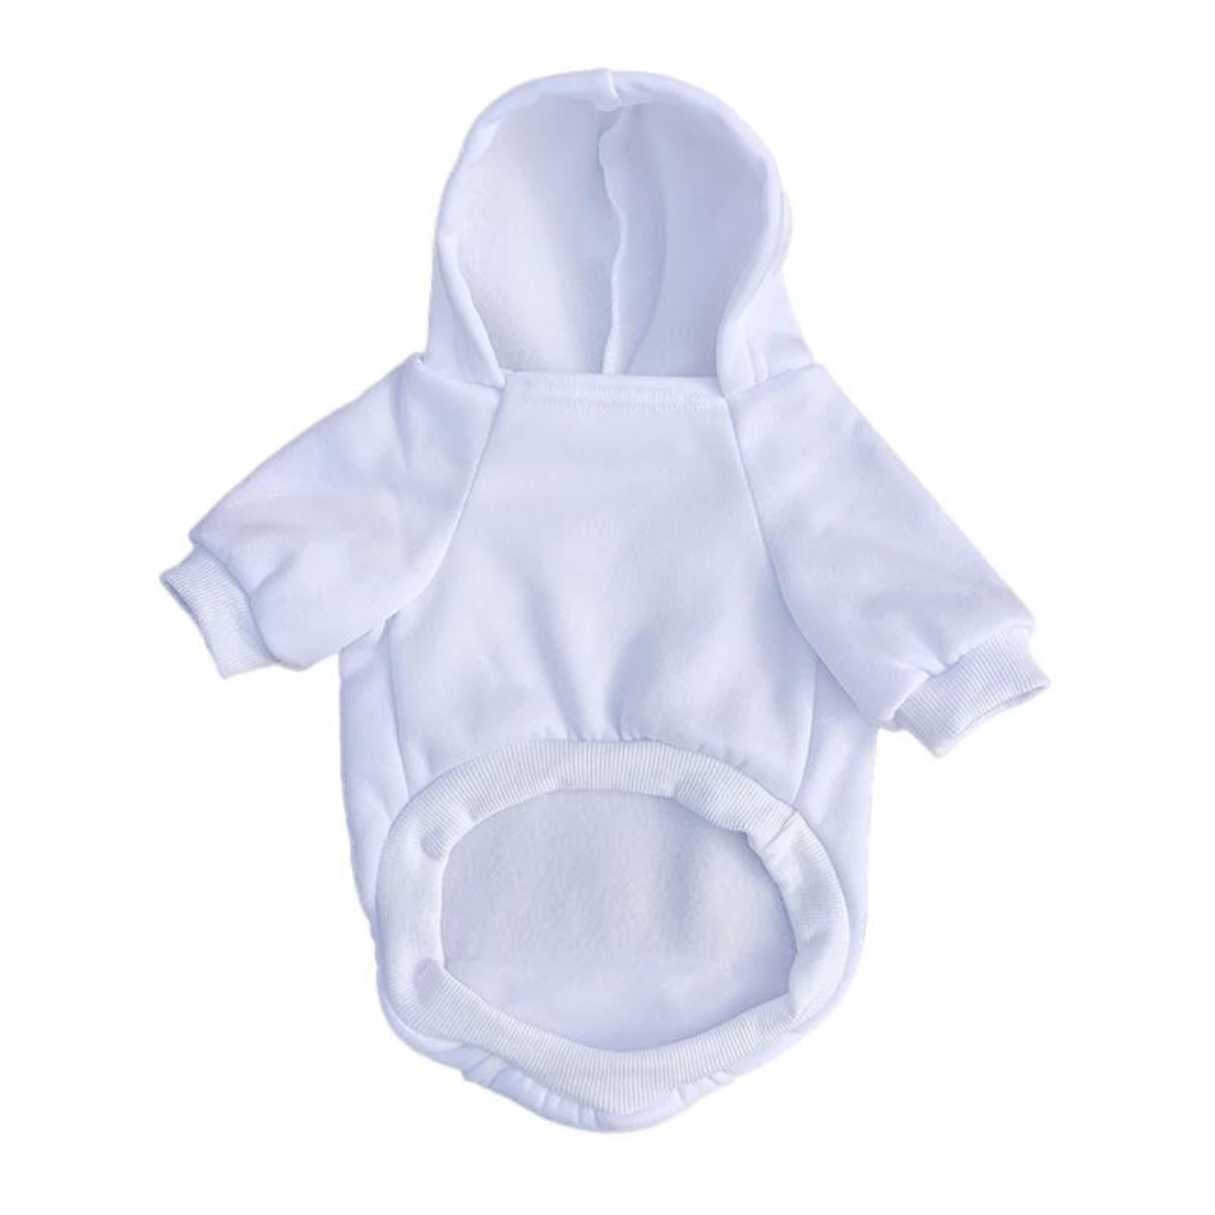 Pawda White Hoodie For Dogs